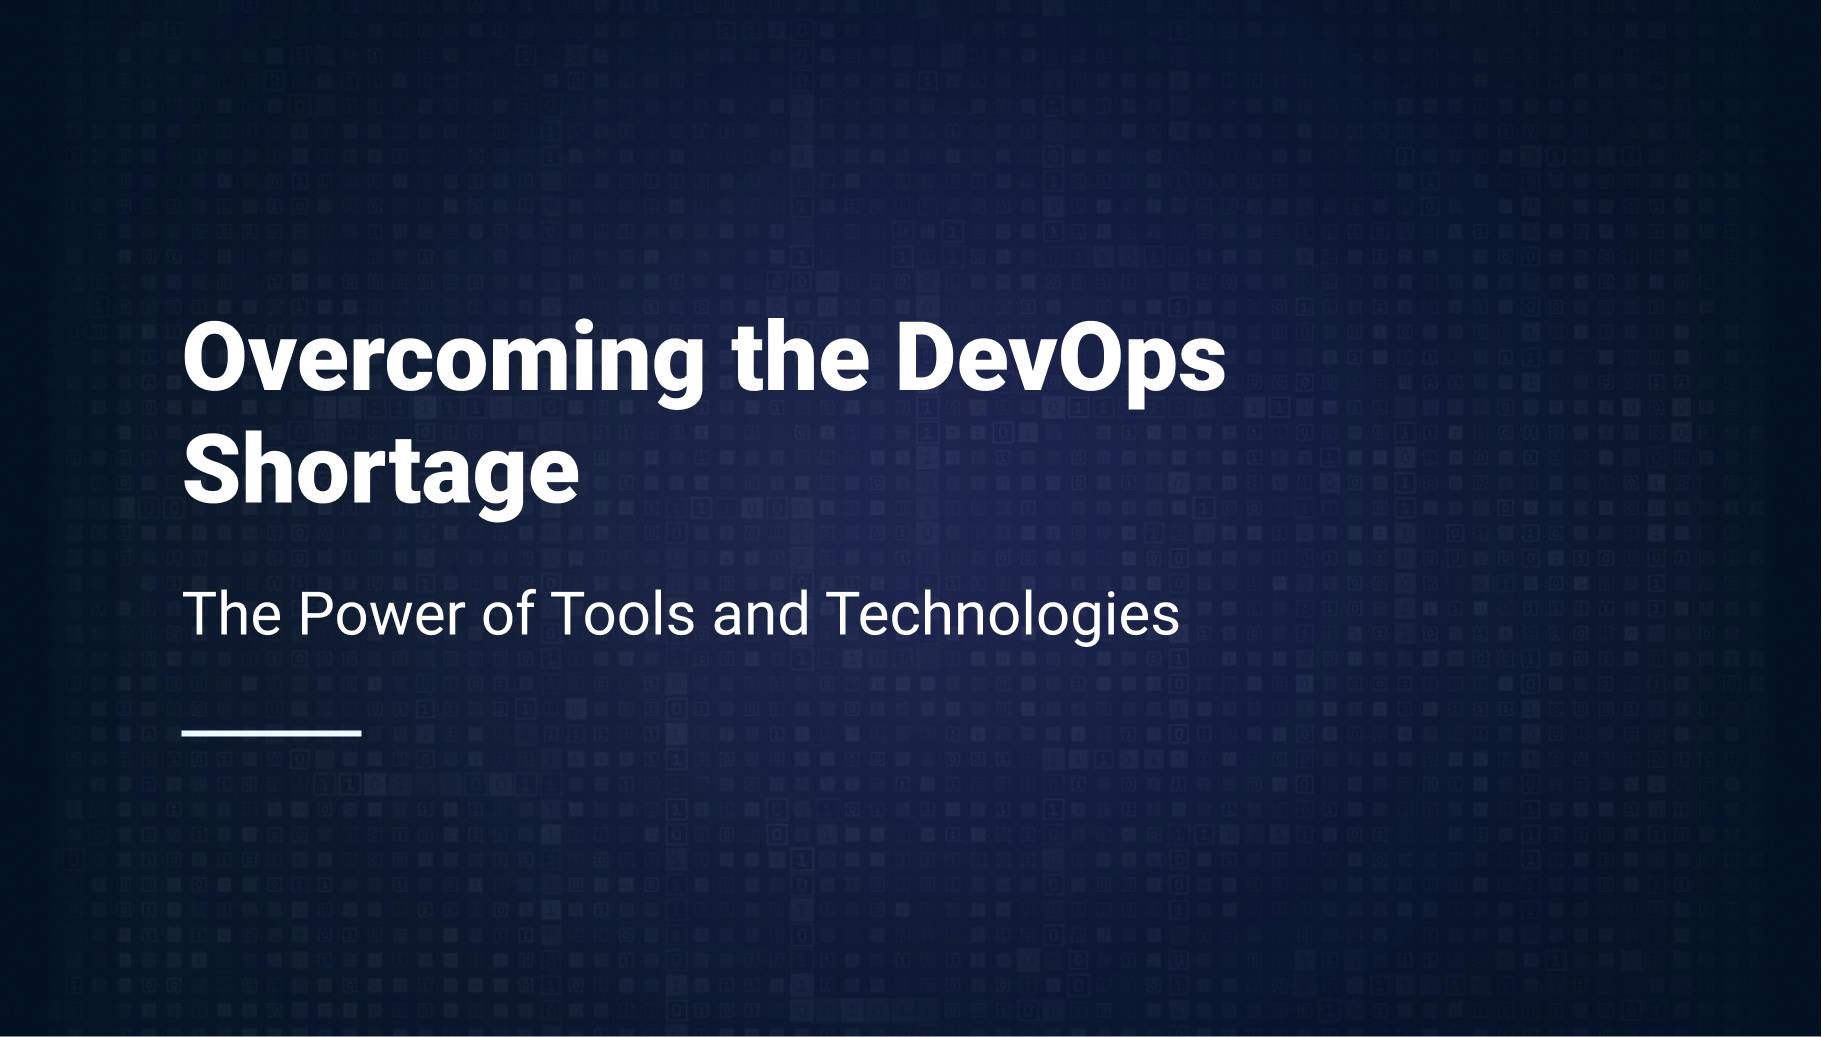 Overcoming The DevOps Shortage: The Power of Tools and Technologies - Qovery